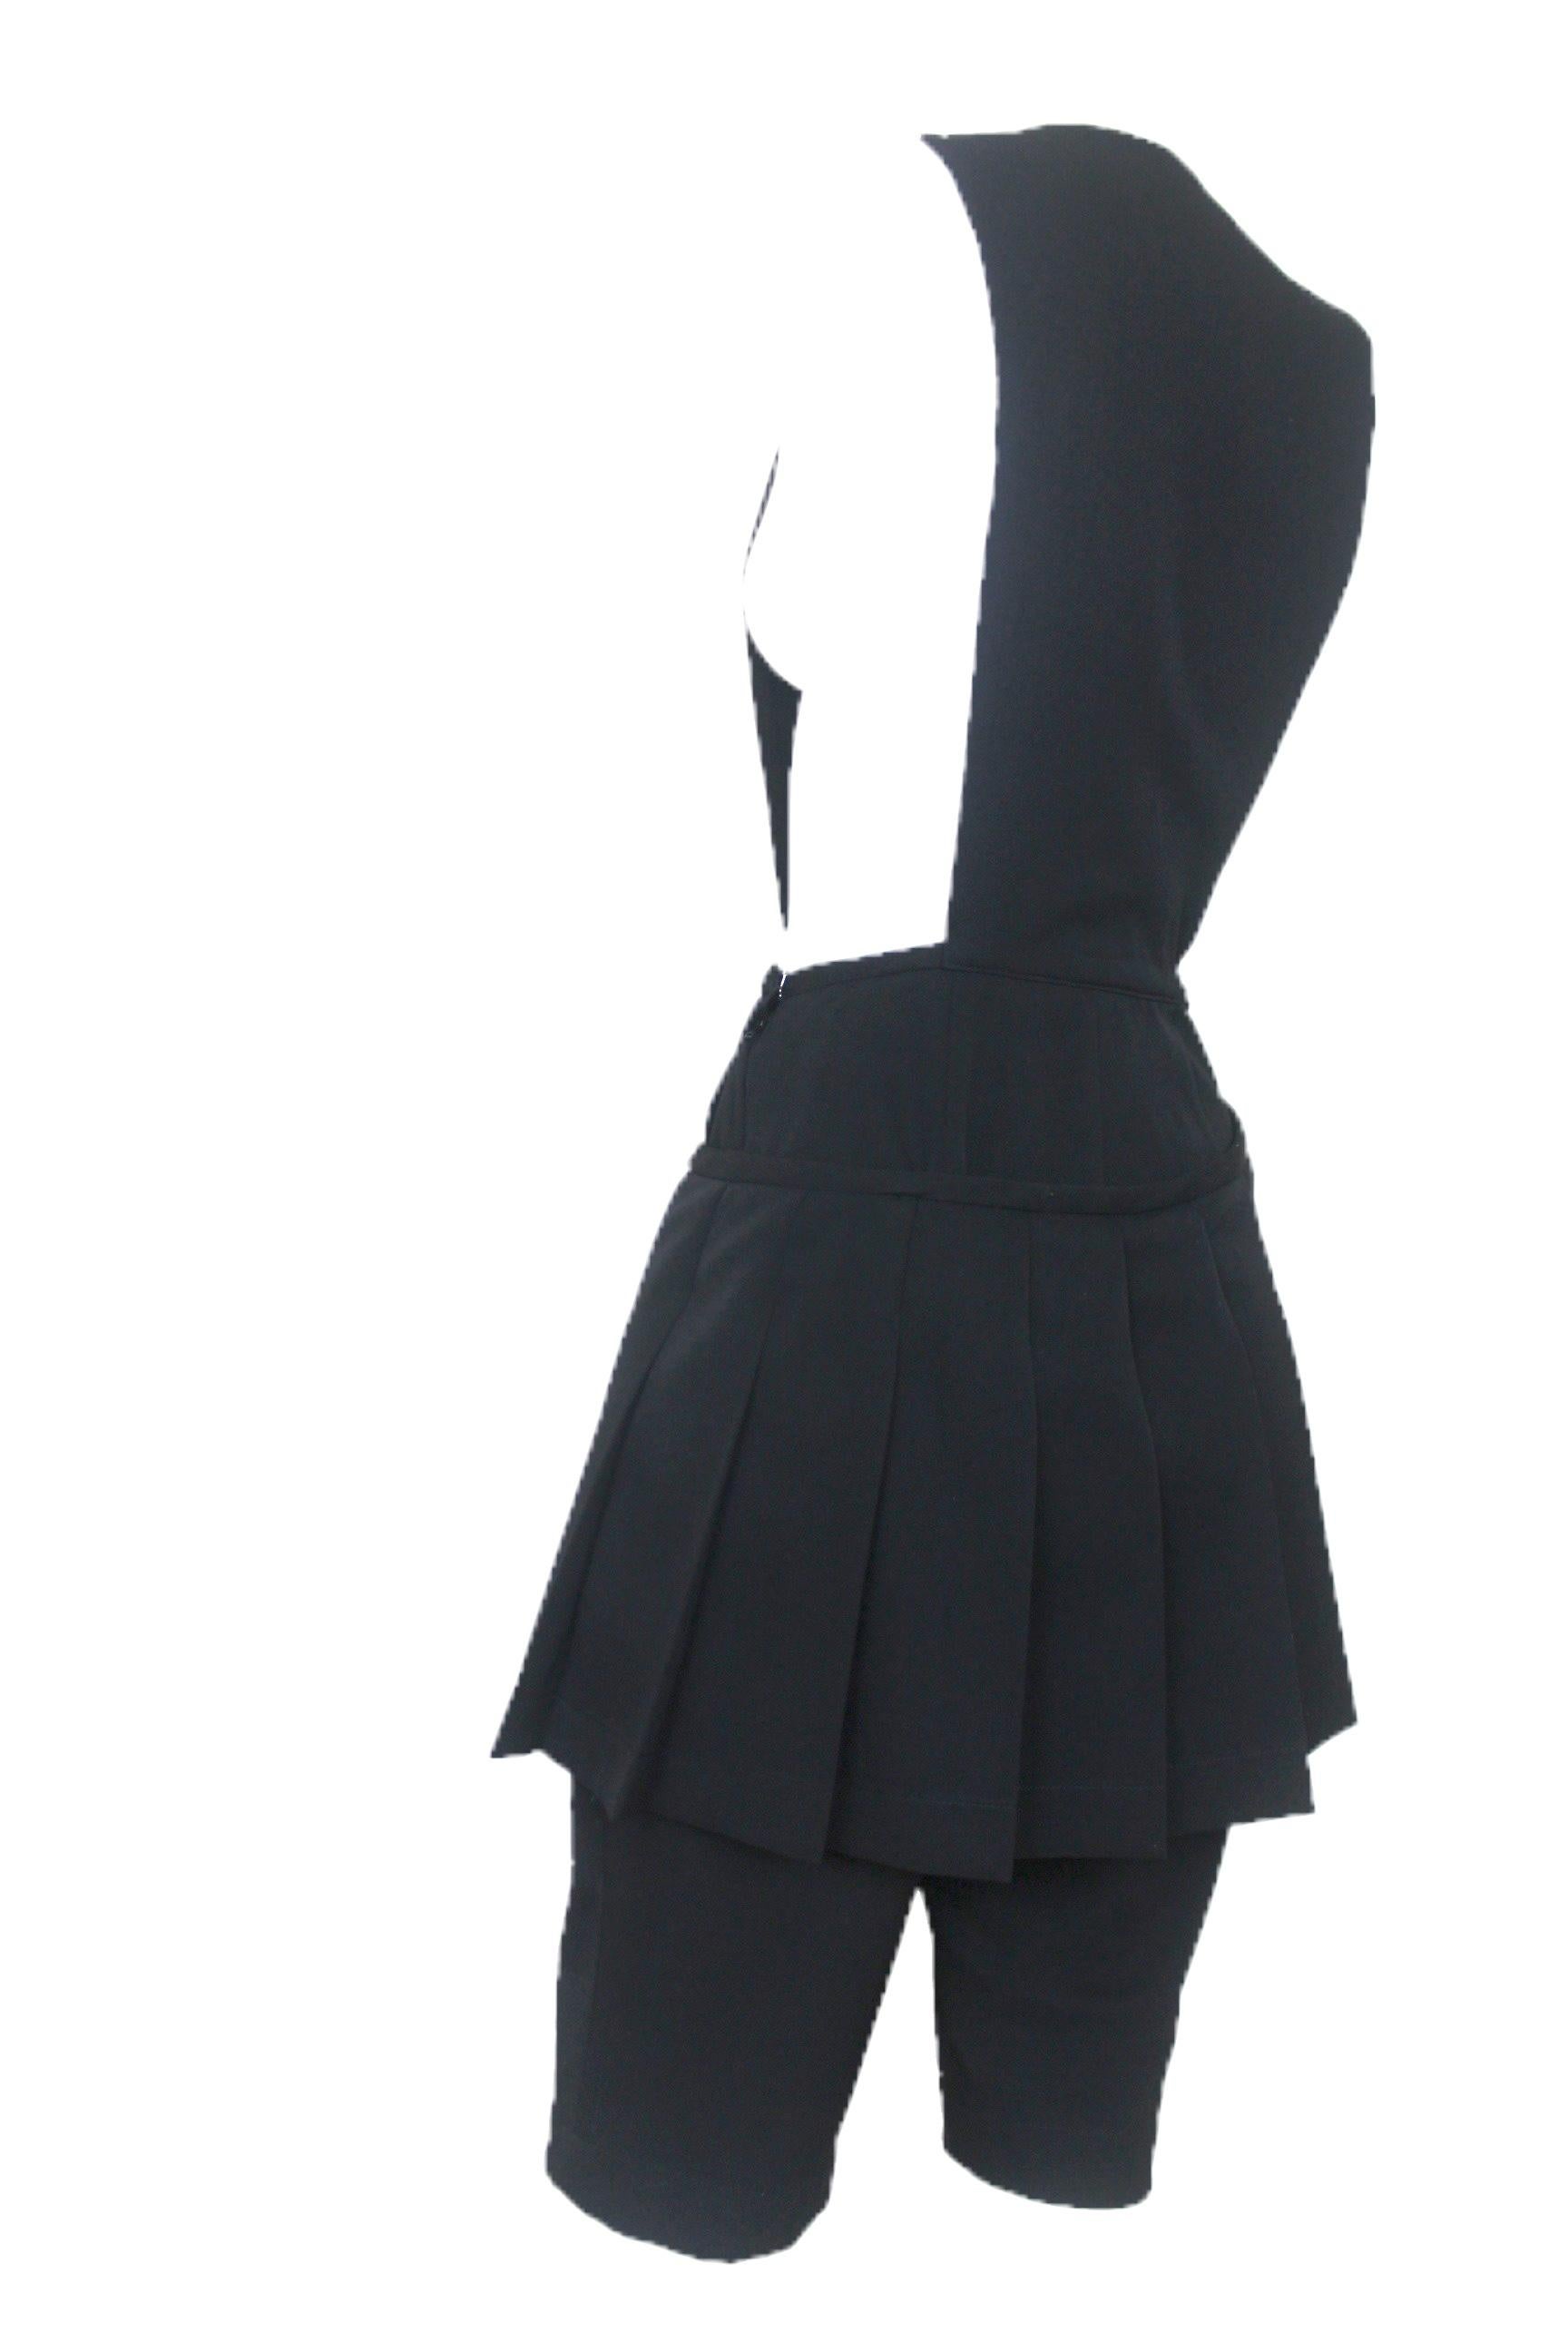 Comme des Garcons 1989 Collection Reverse Dungarees with attached Skirt For Sale 11